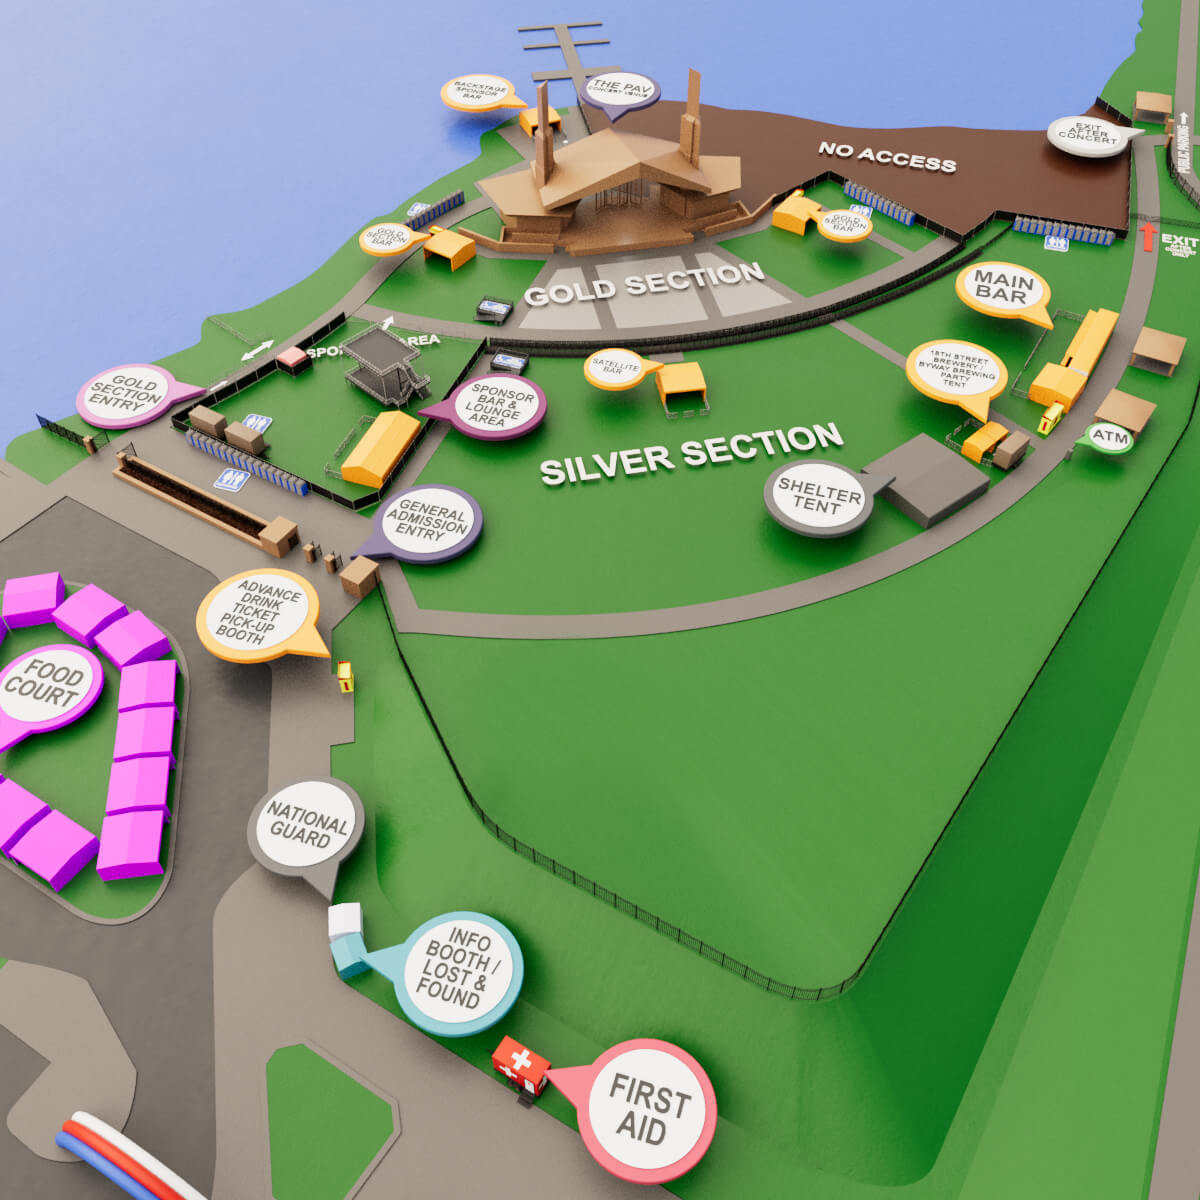 This picture, provided by the website of the Festival of the Lakes, demonstrates the layout of the event during Lil Wayne’s performance. It shows the gold and silver sections along with things like the bar, food court, and bathrooms. This map could also give you a general idea of what the other days would look like.